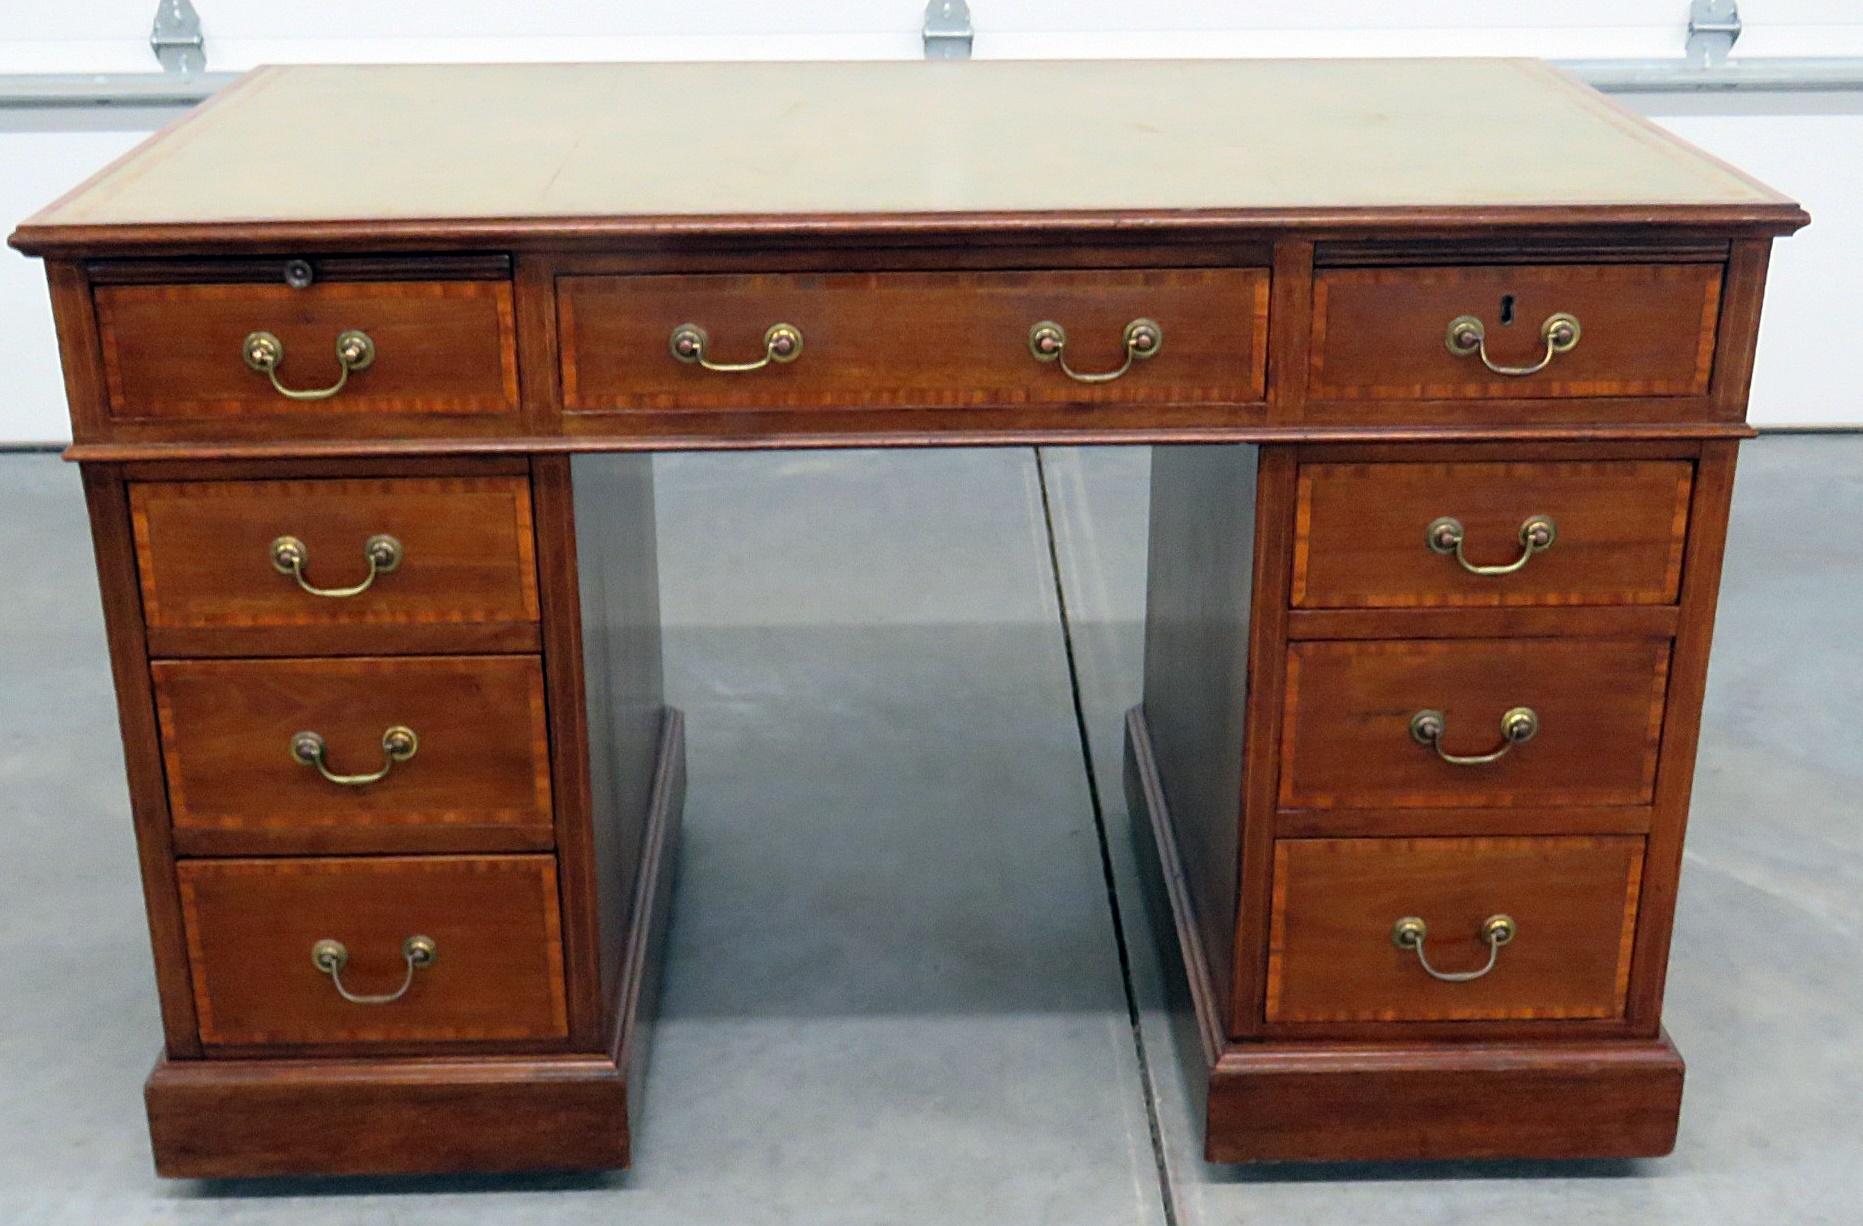 Antique inlaid leather top writing desk with 9 drawers and a pull out writing surface.